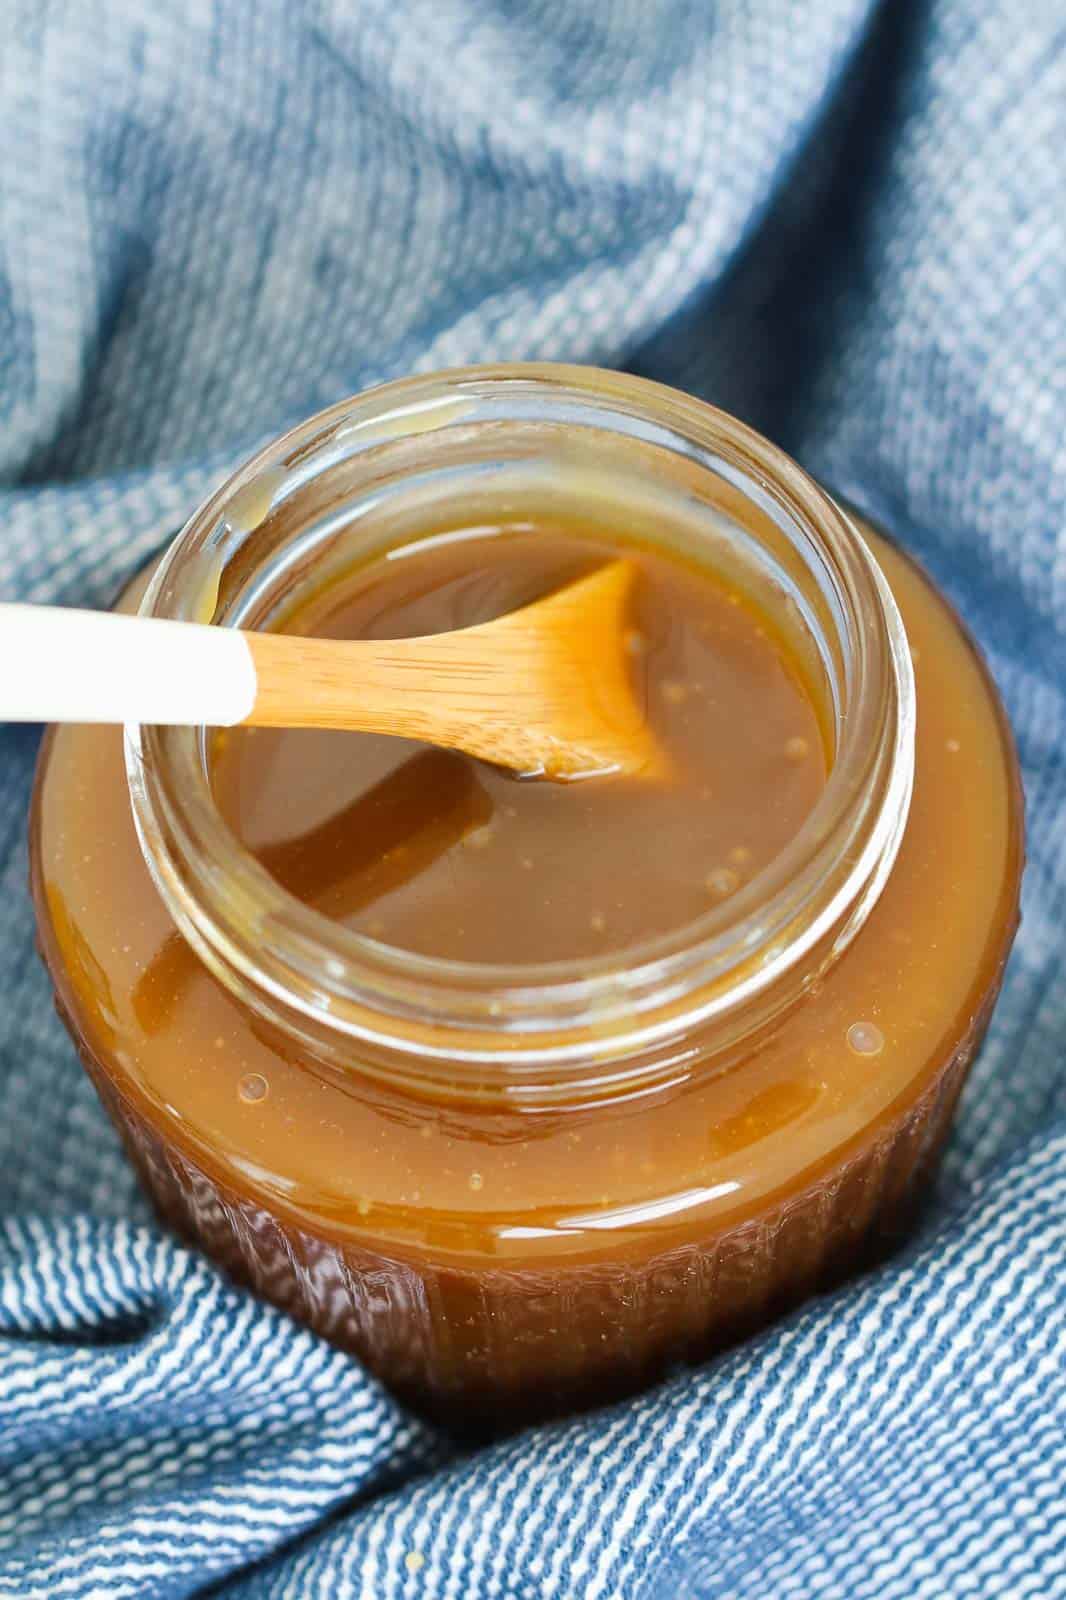 A spoon in a jar of homemade caramel.